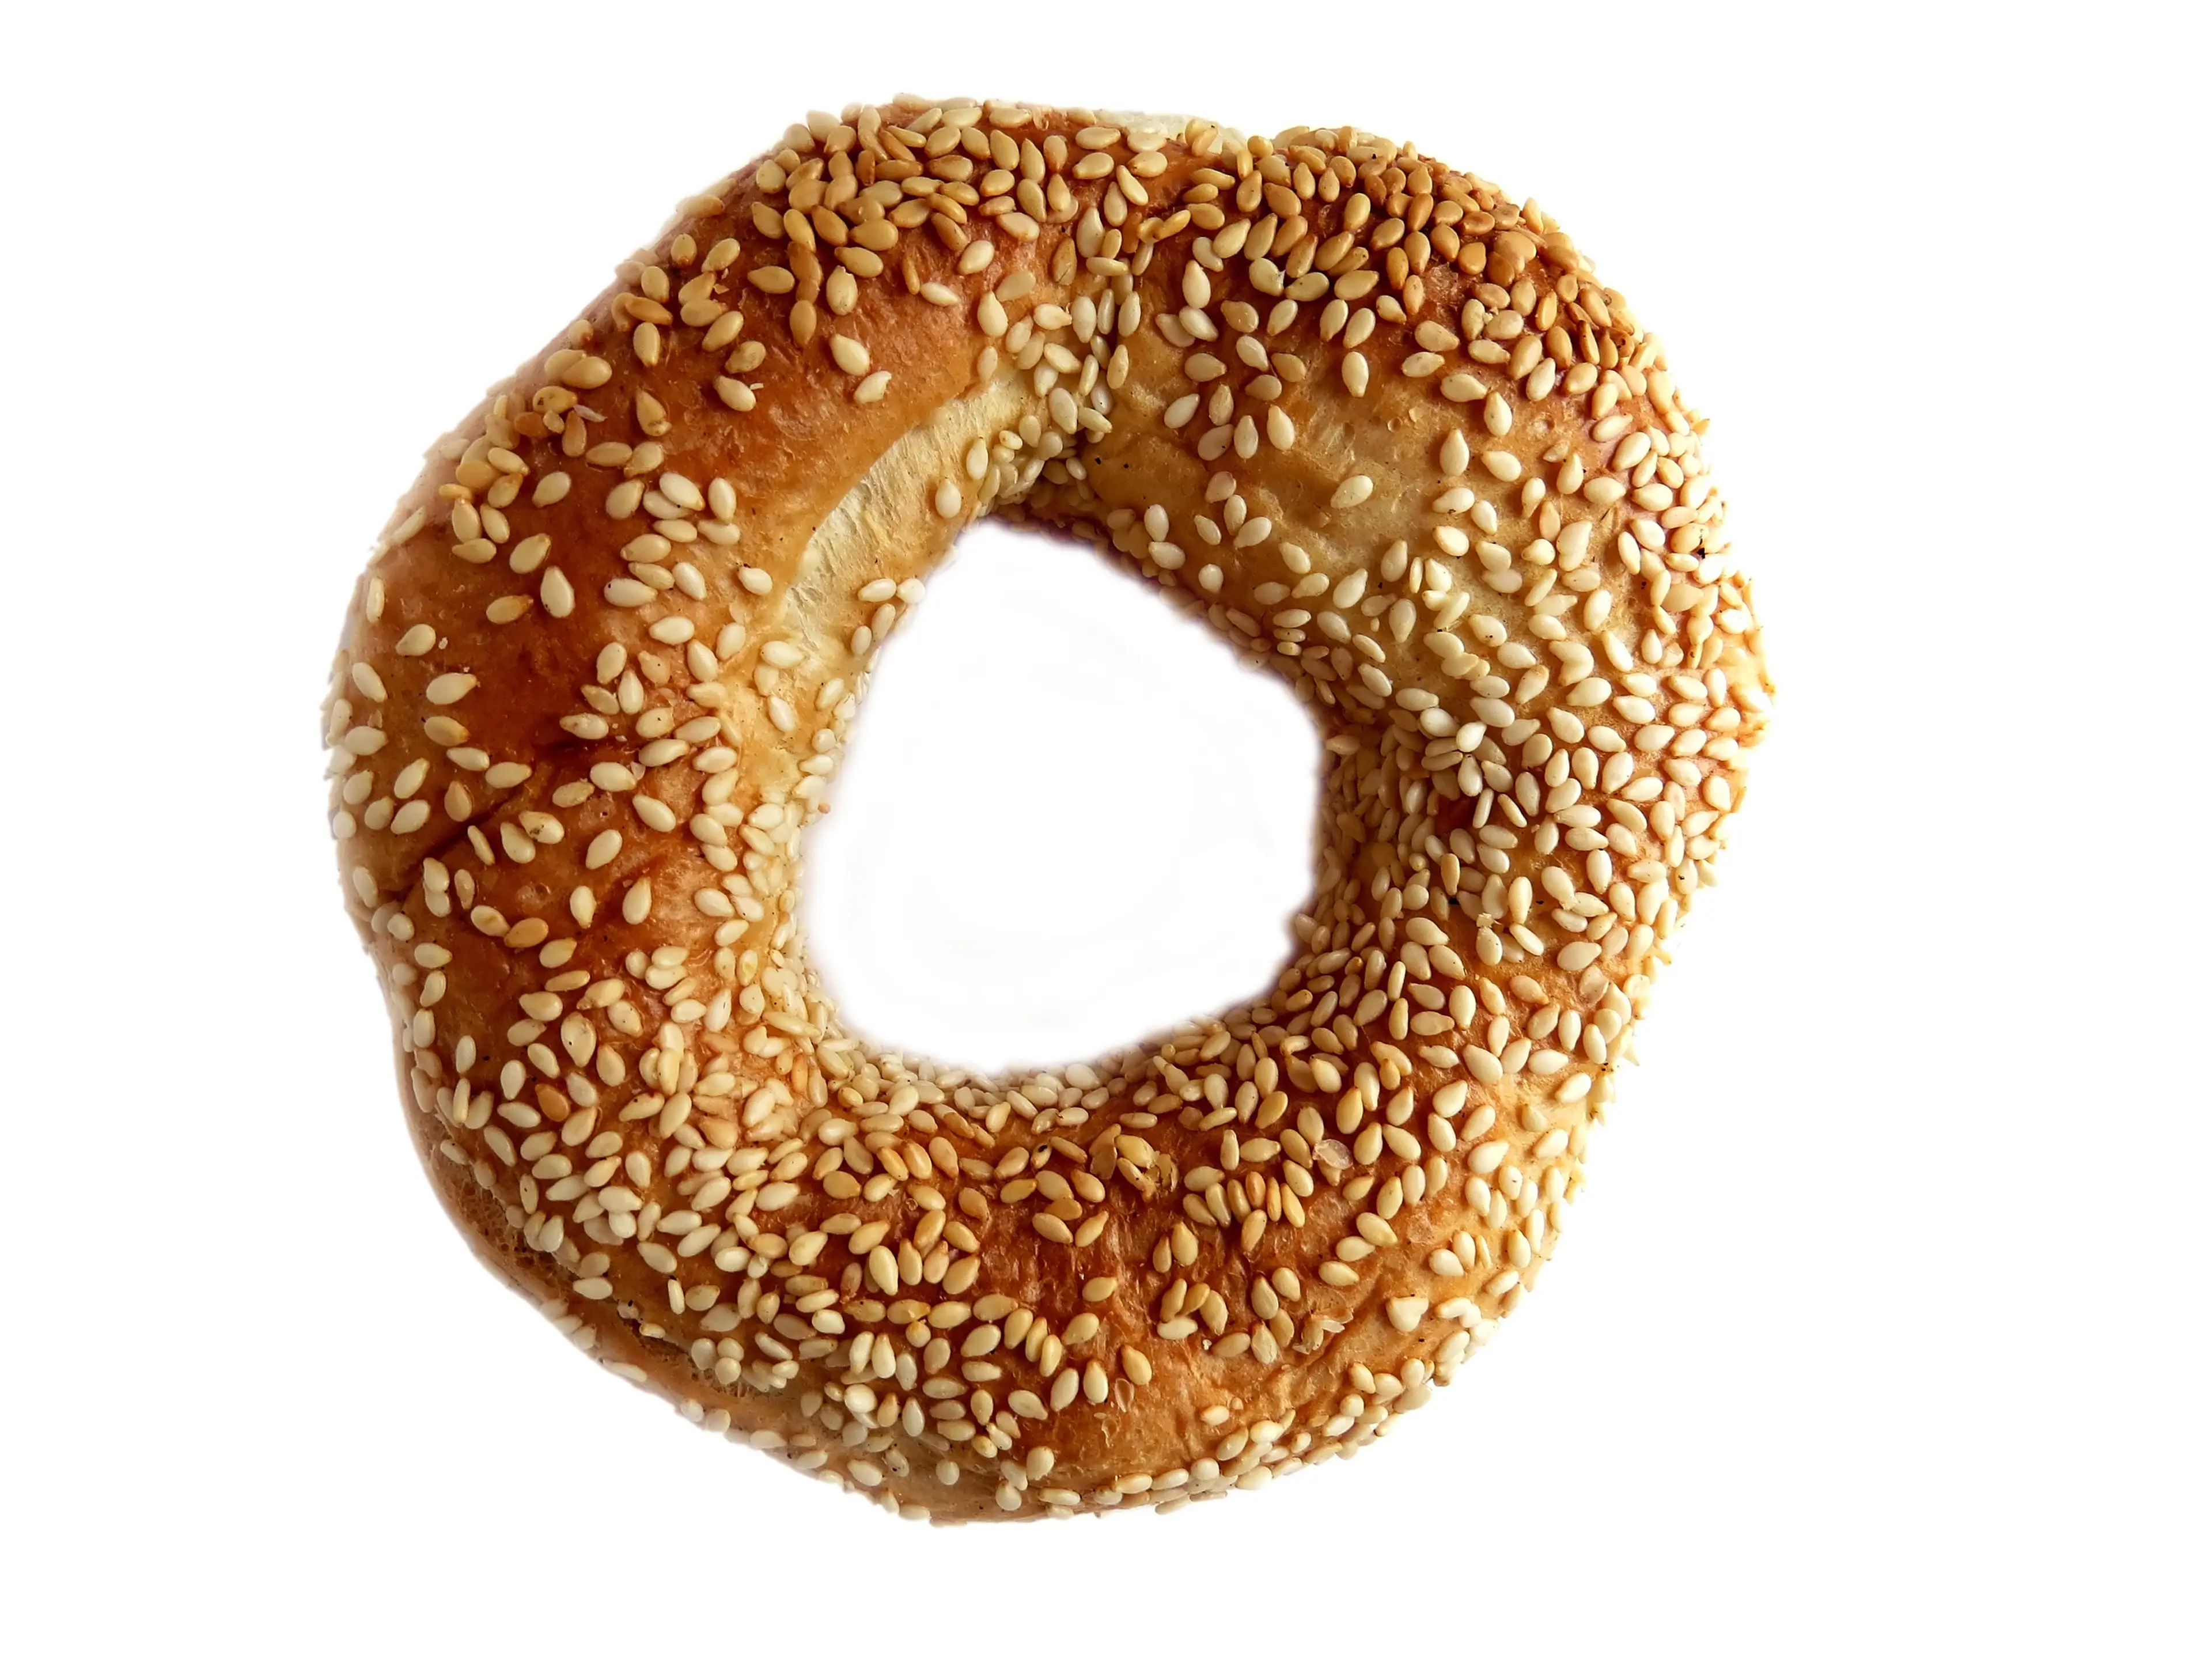 Montreal-style Bagel